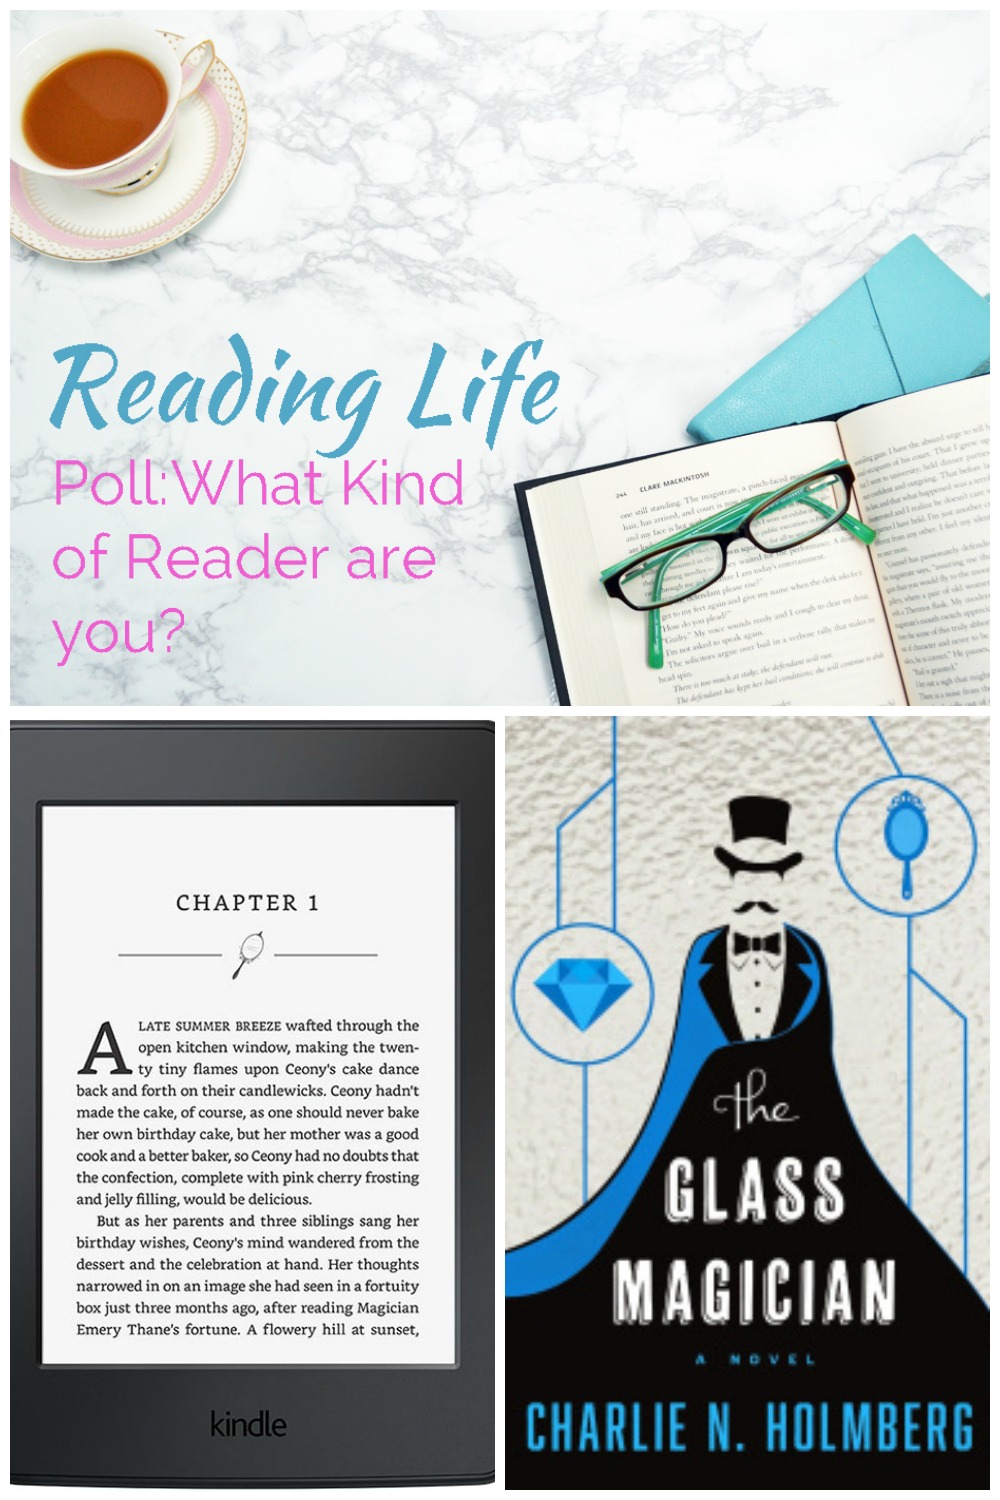 What Kind of Reader are You?